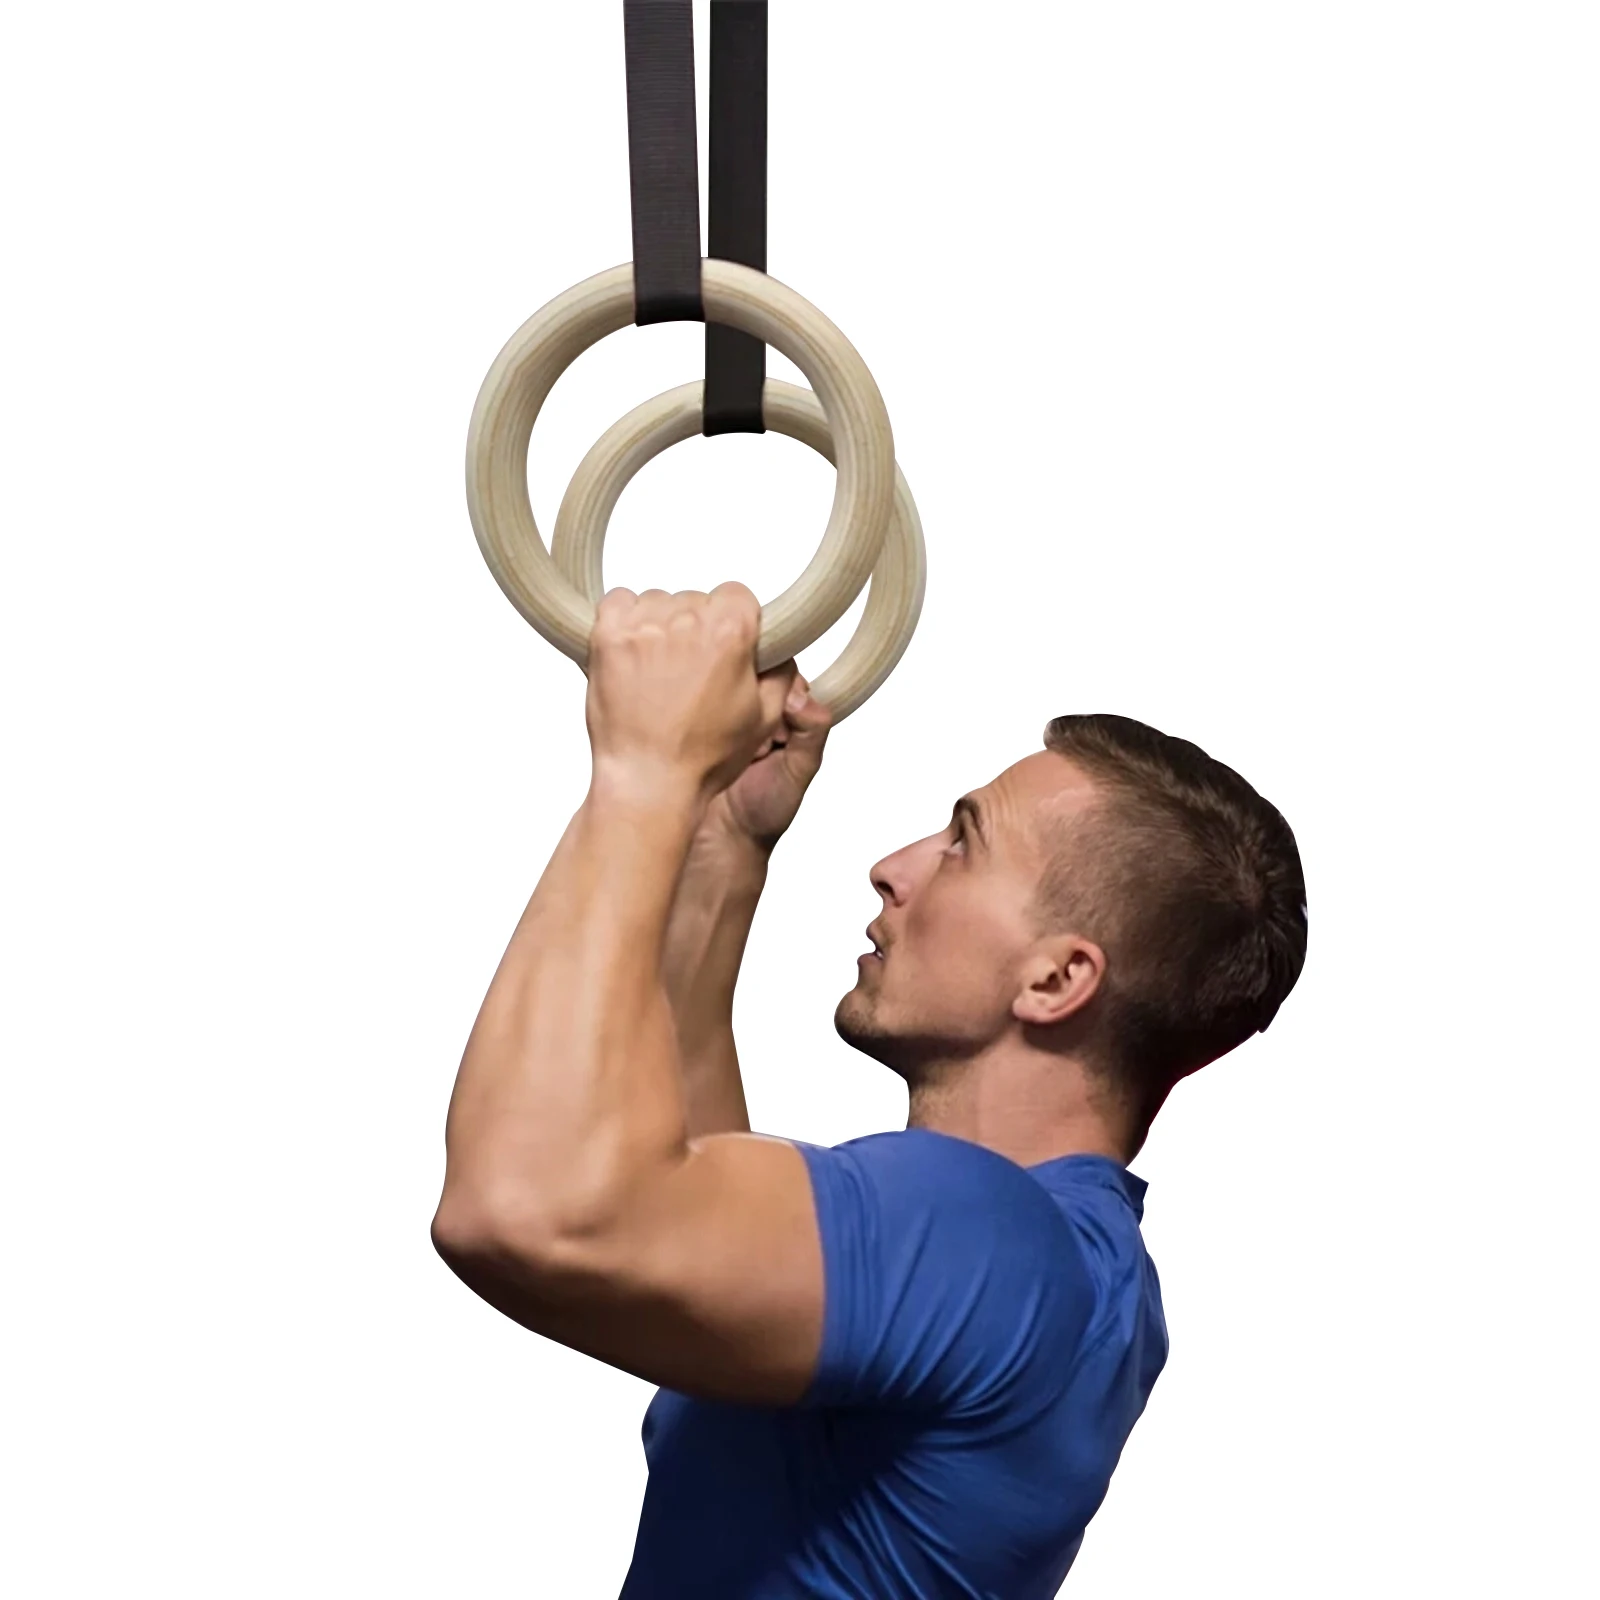 

Amazon's best selling Wood gymnastic gym Rings with Adjustable Straps Train Workout Strength Training Pull Ups and Dips, Customizable